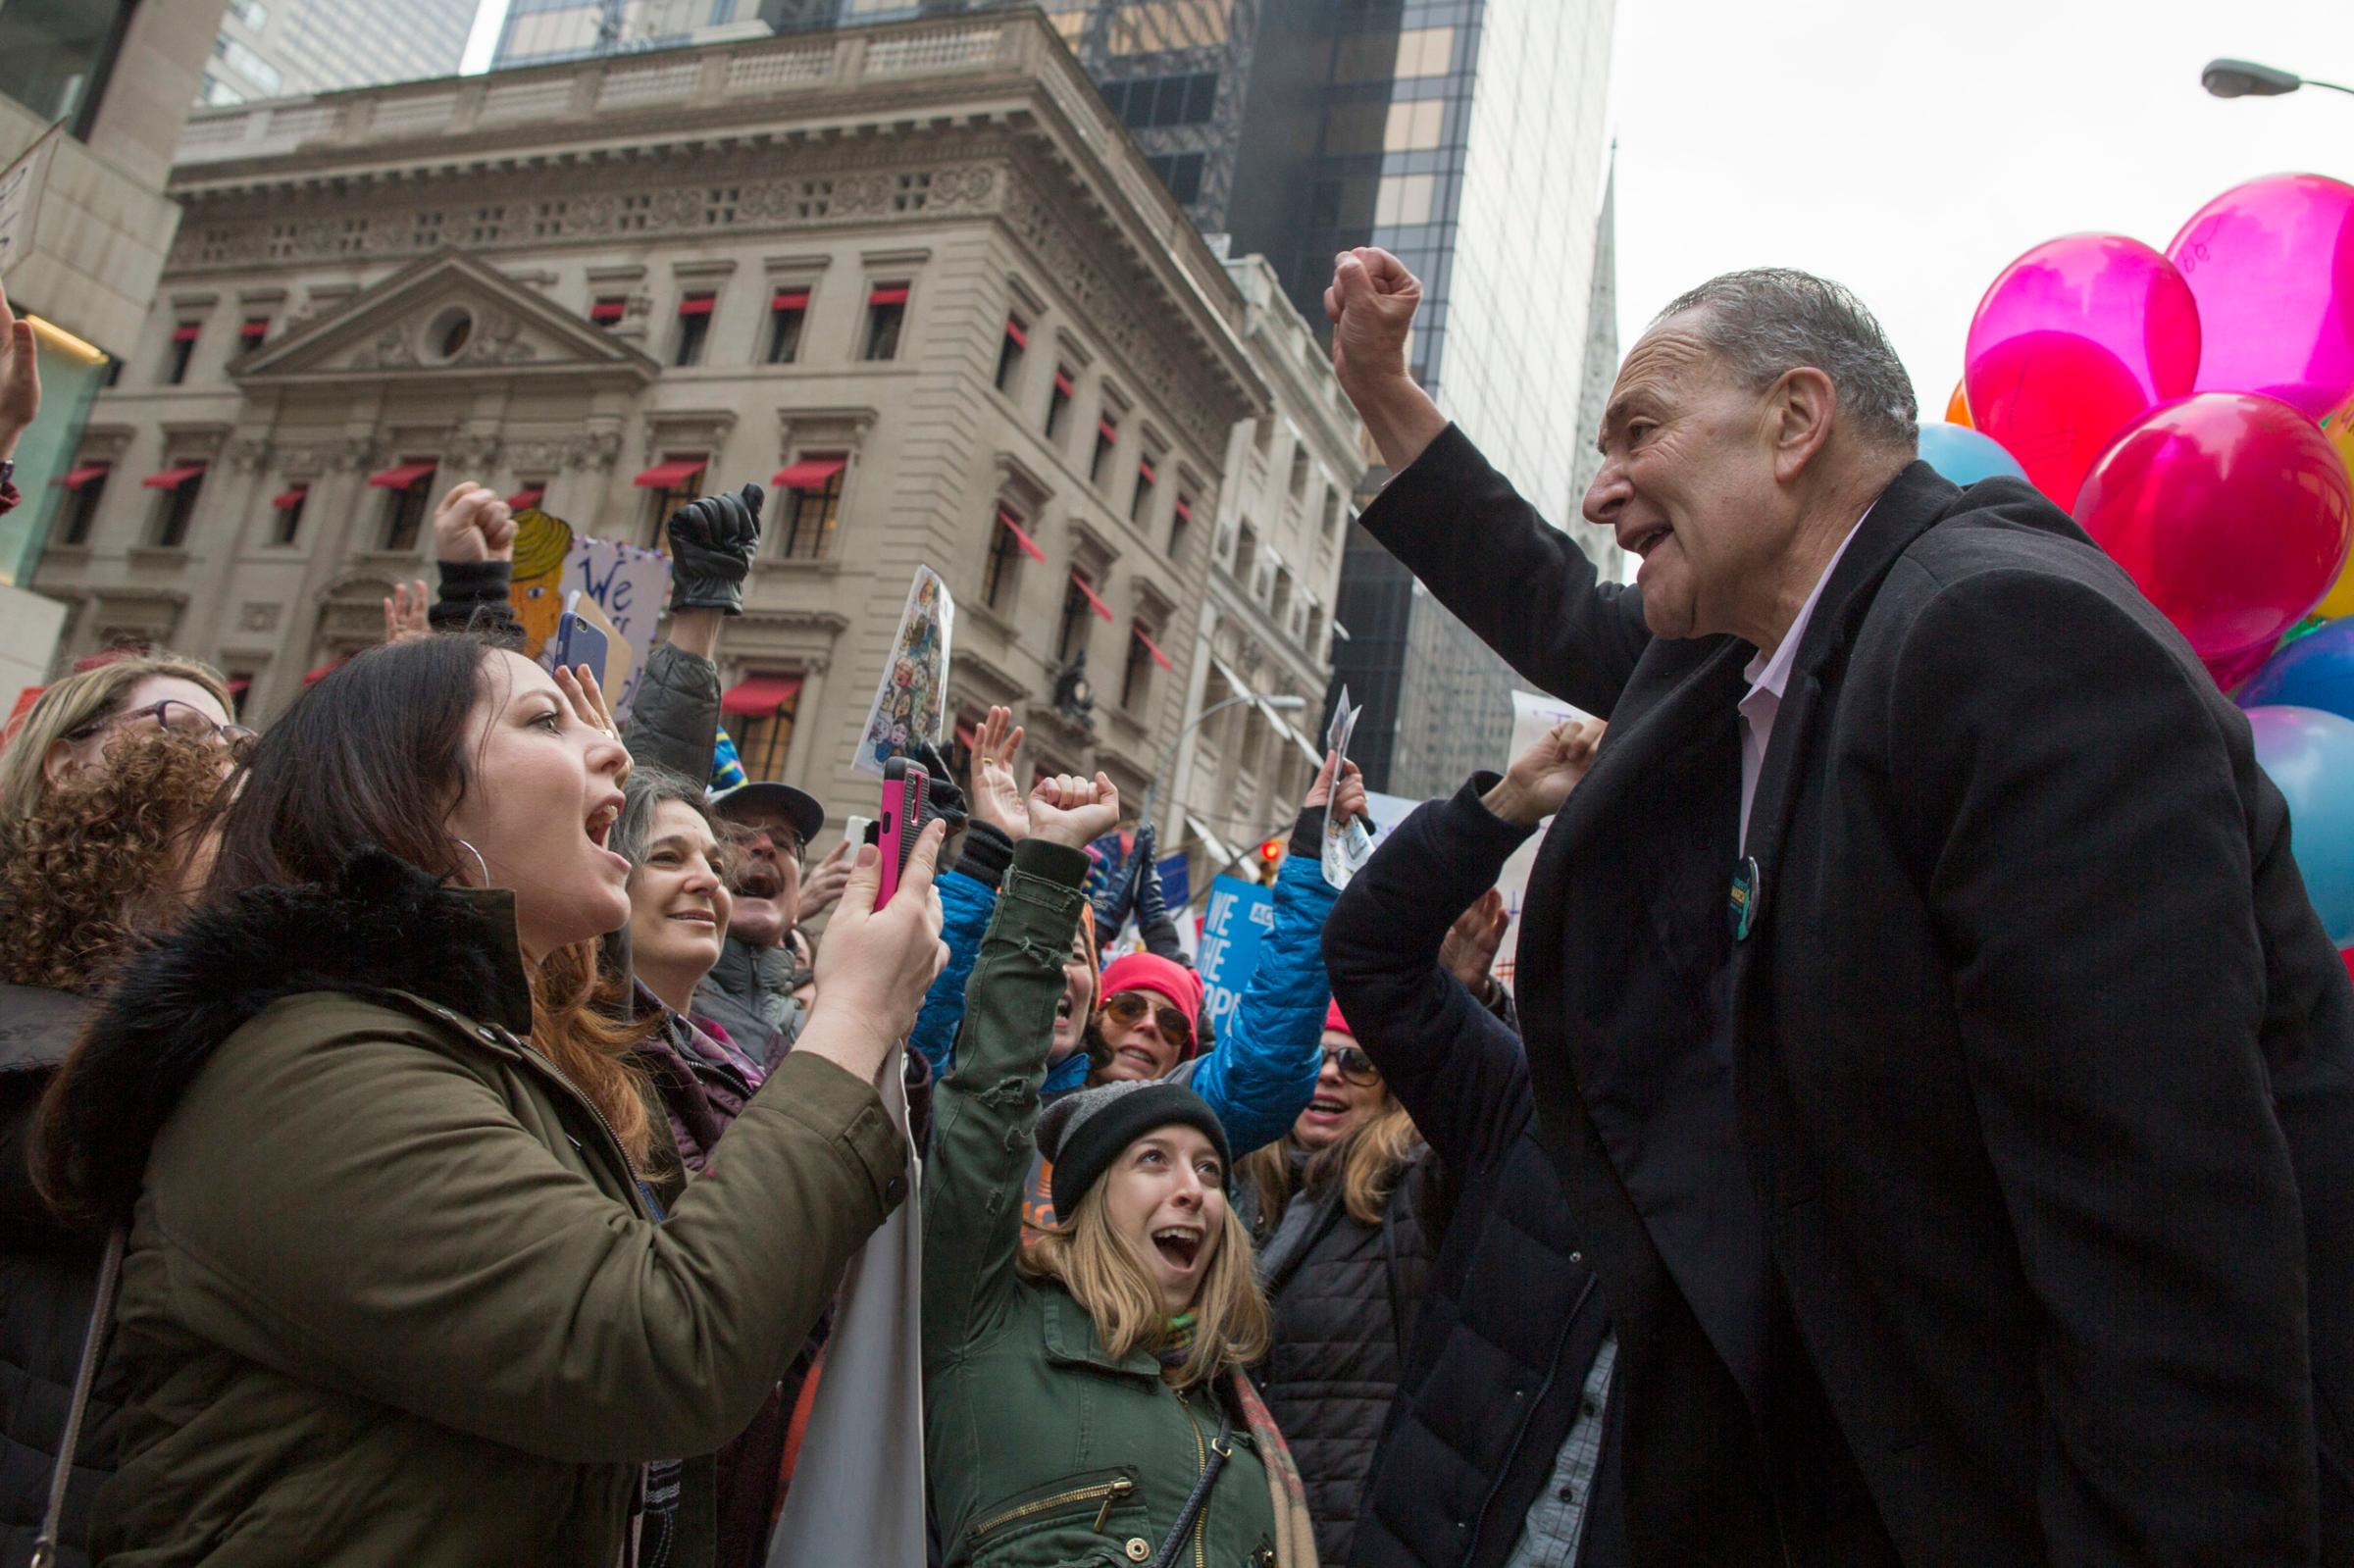 Schumer joins demonstrators marching up Fifth Avenue in New York during a women's march being held in solidarity with similar events taking place in Washington and around the nation, Jan. 21, 2017.